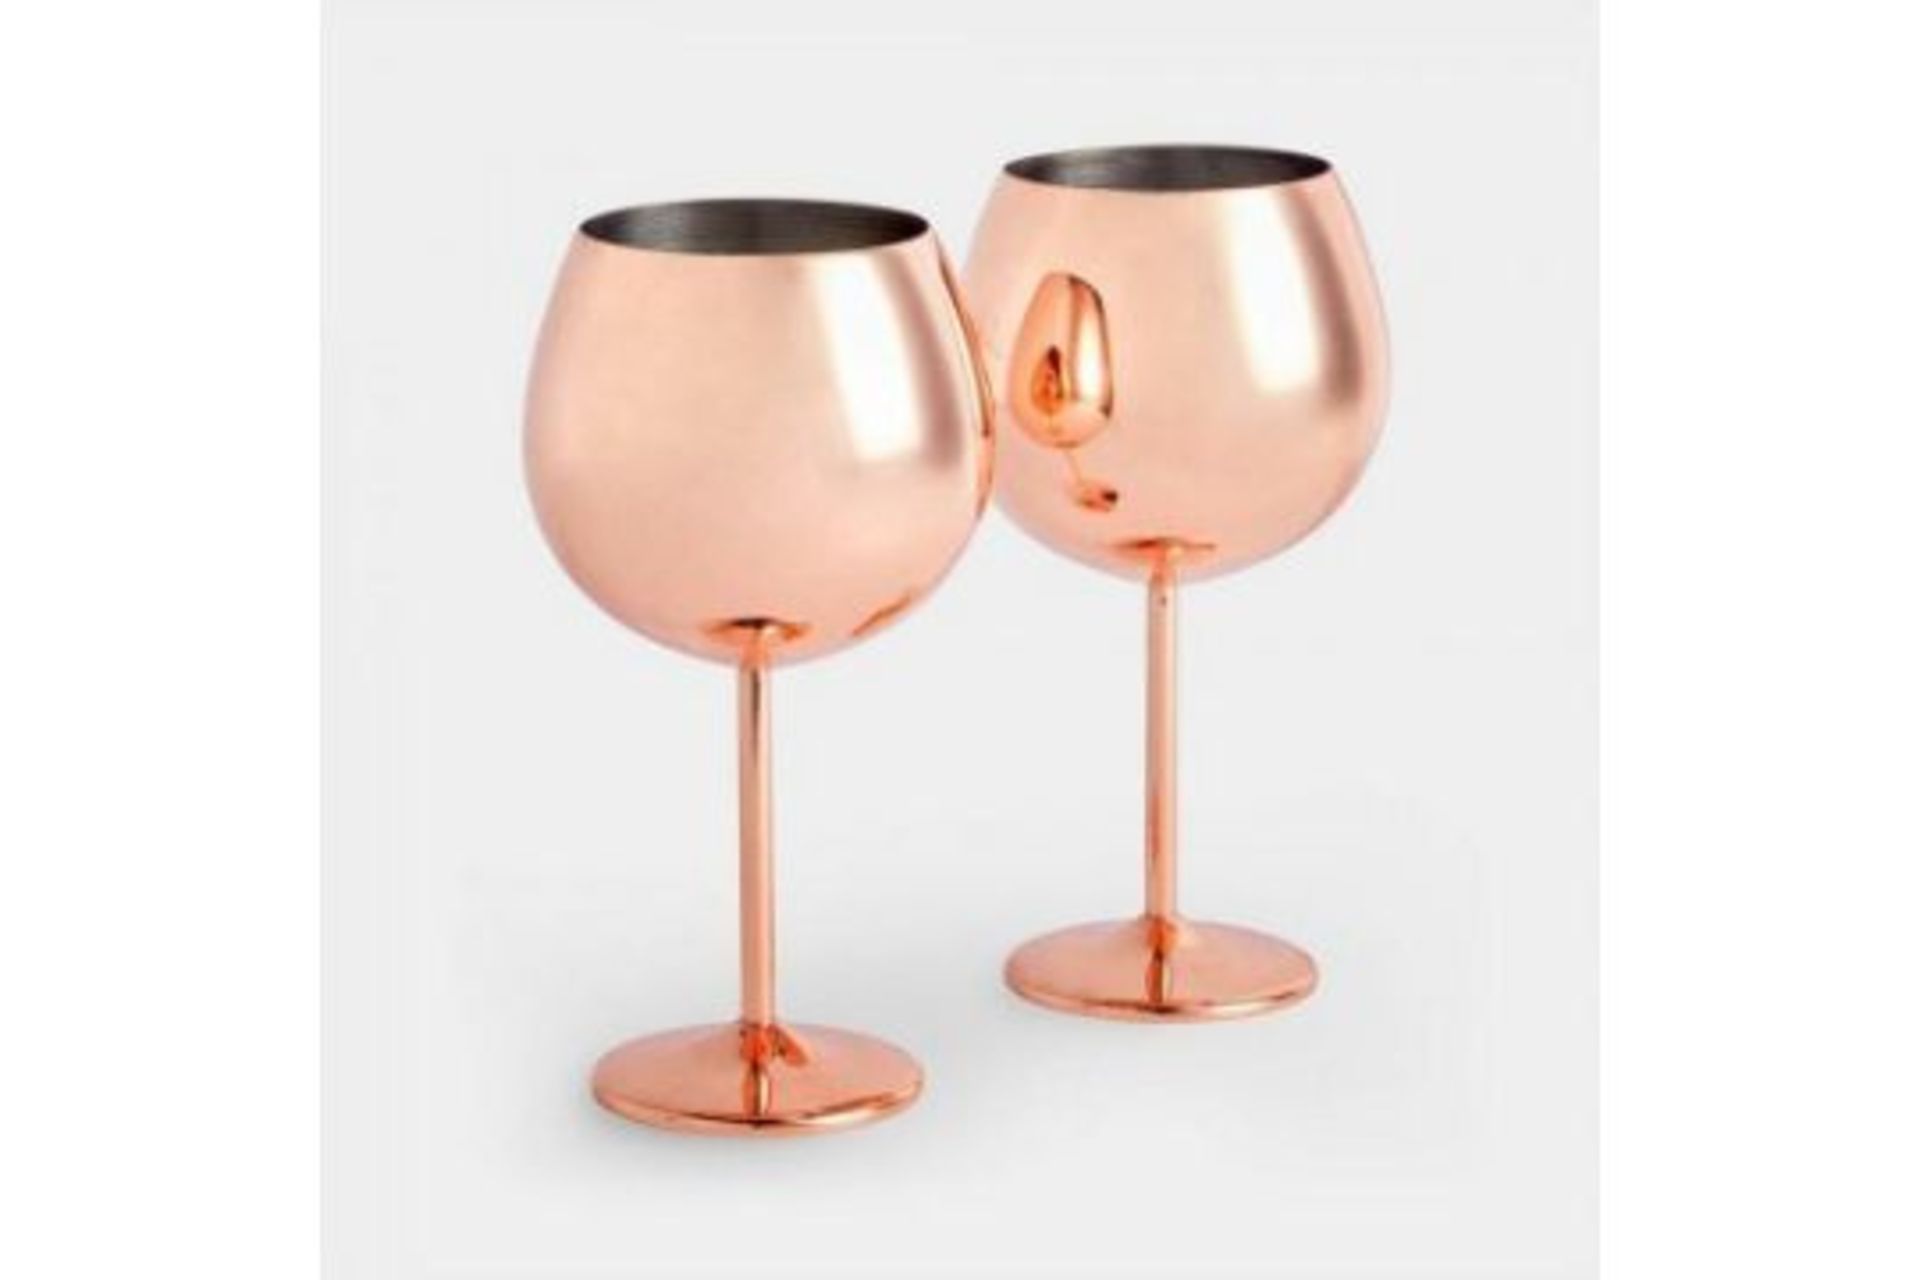 Beautify 2 Gin Balloon Glasses Rose Gold G&T Cocktail Glass Set Stainless Steel (ER51) Brand: